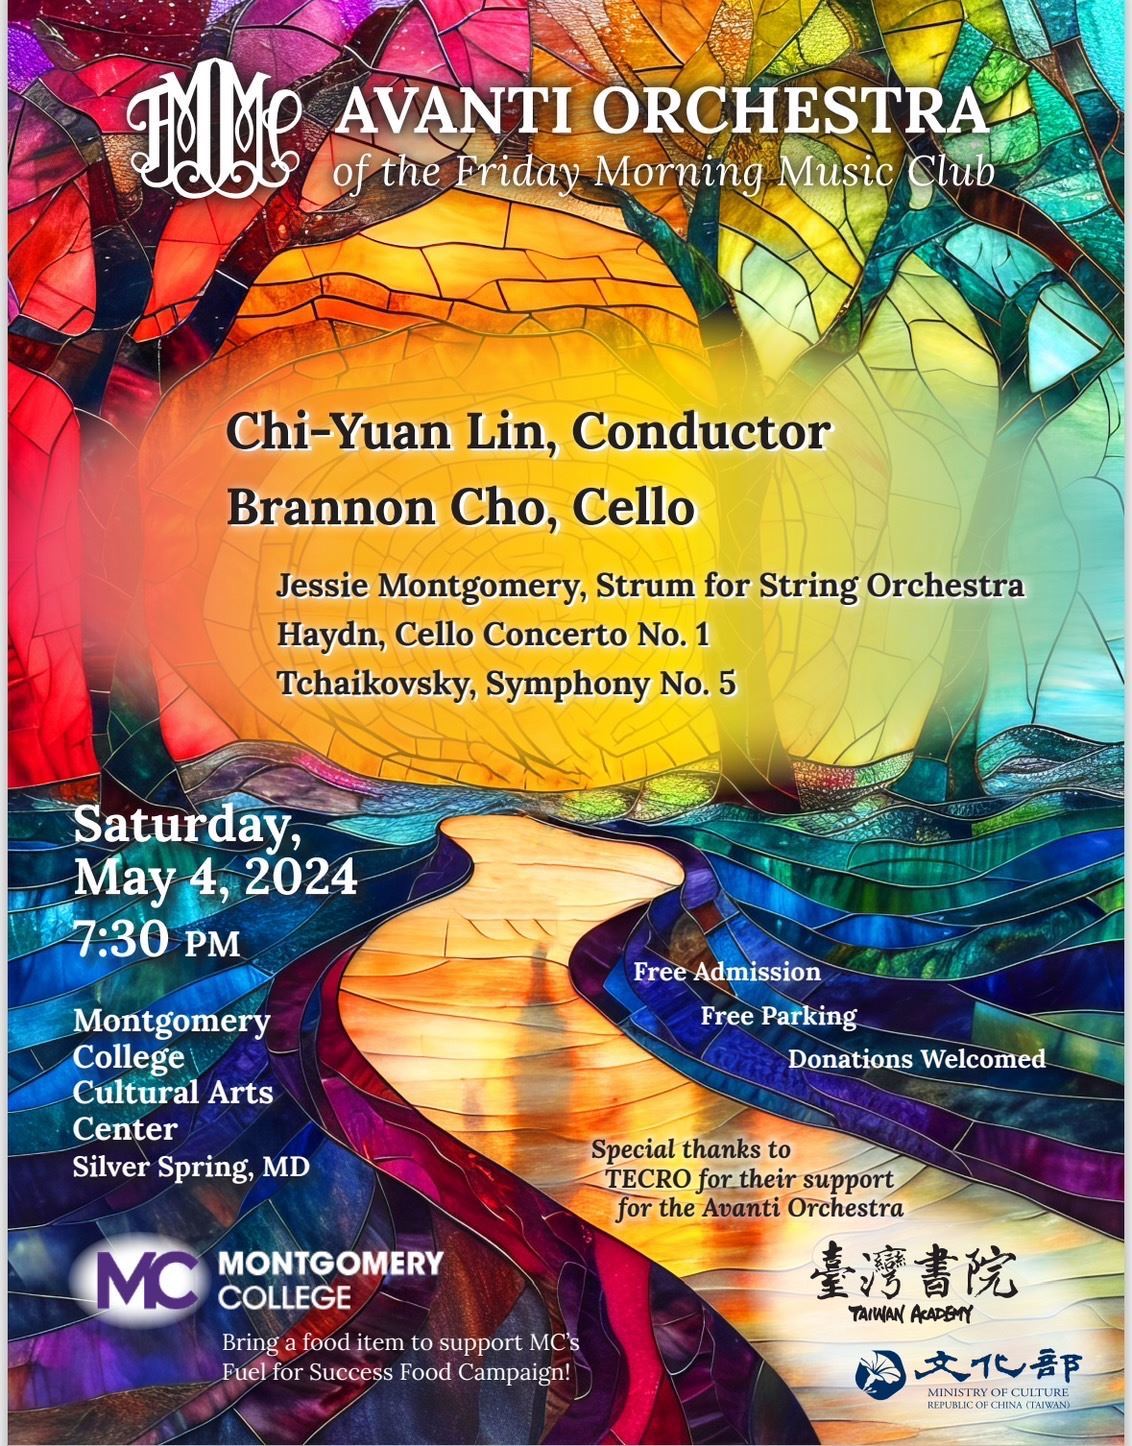 Taiwanese conductor to present a show with Avanti Orchestra in Maryland